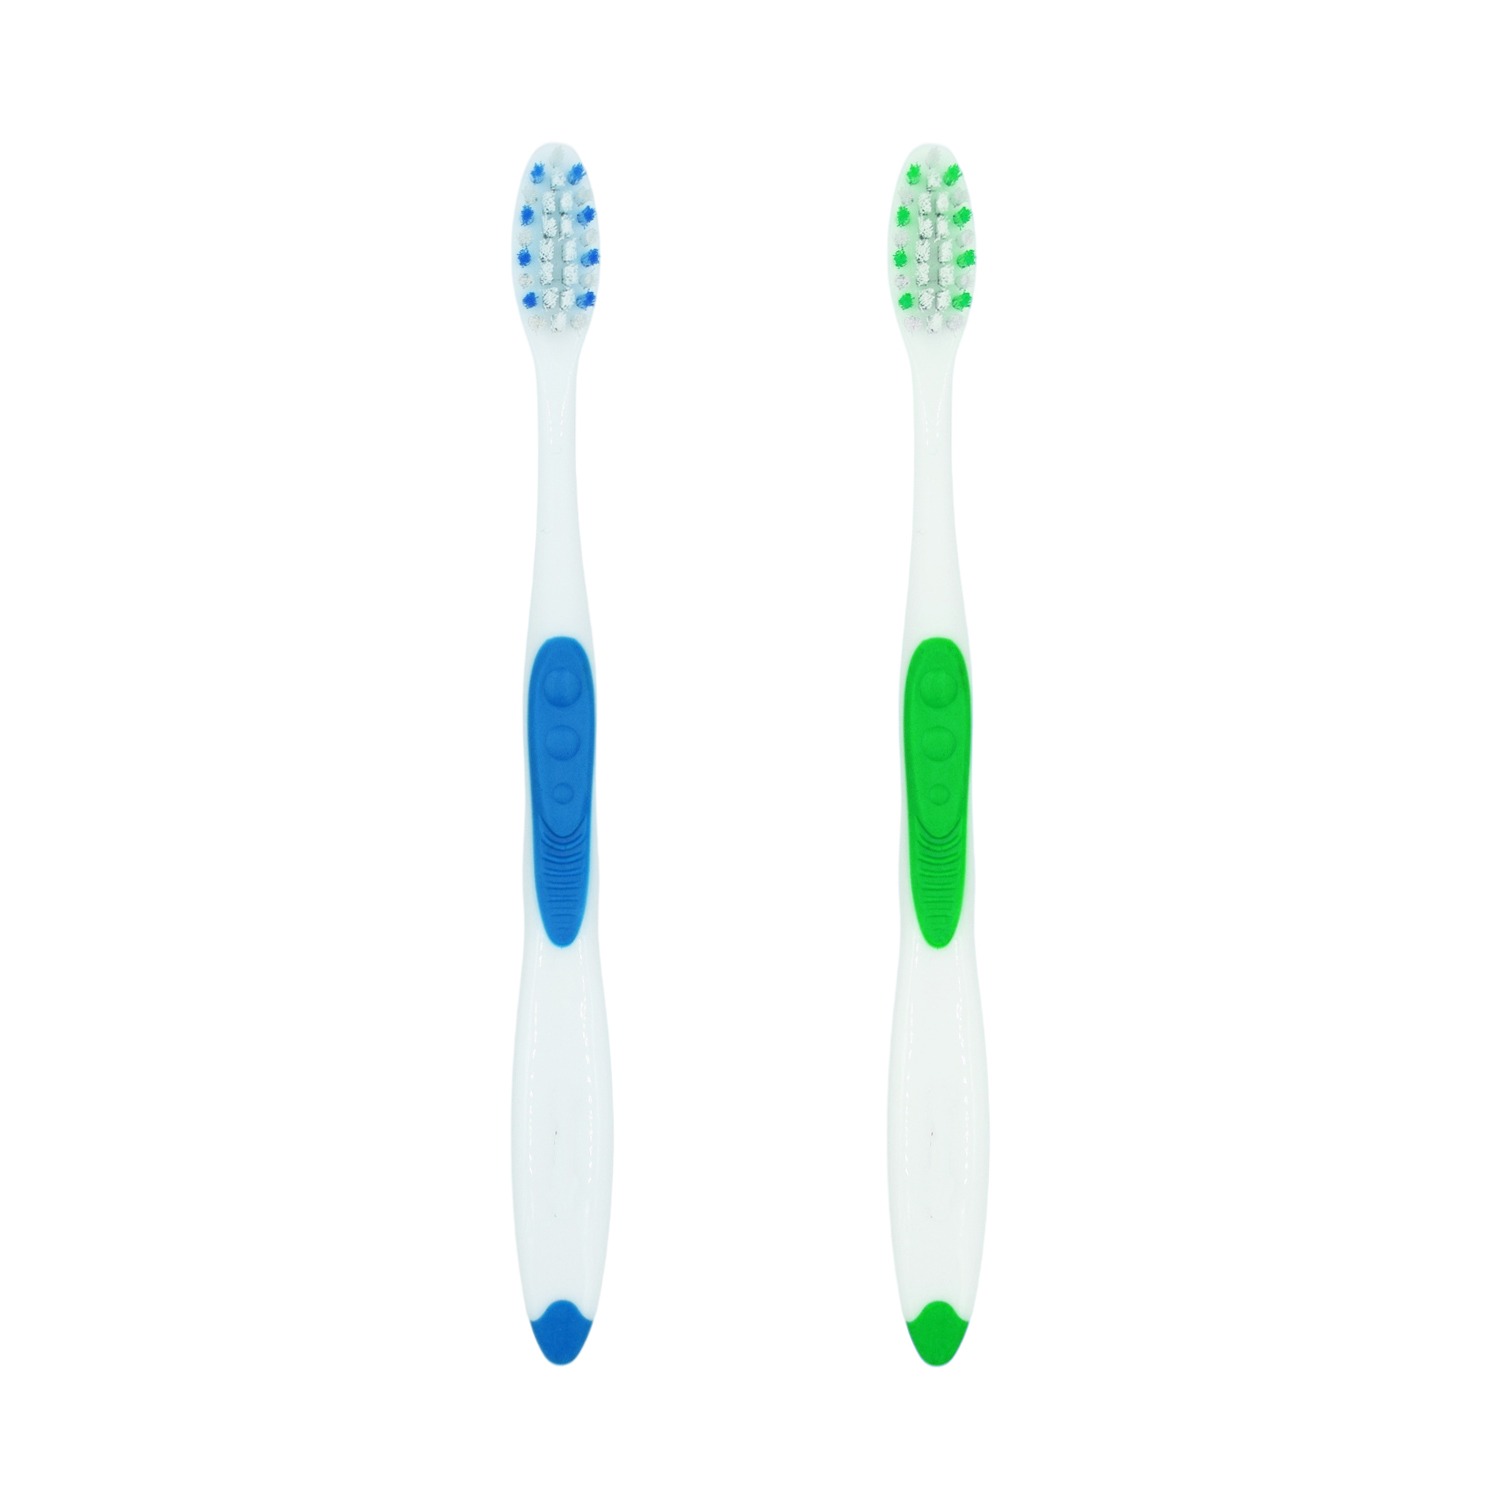 Adult toothbrush 1050